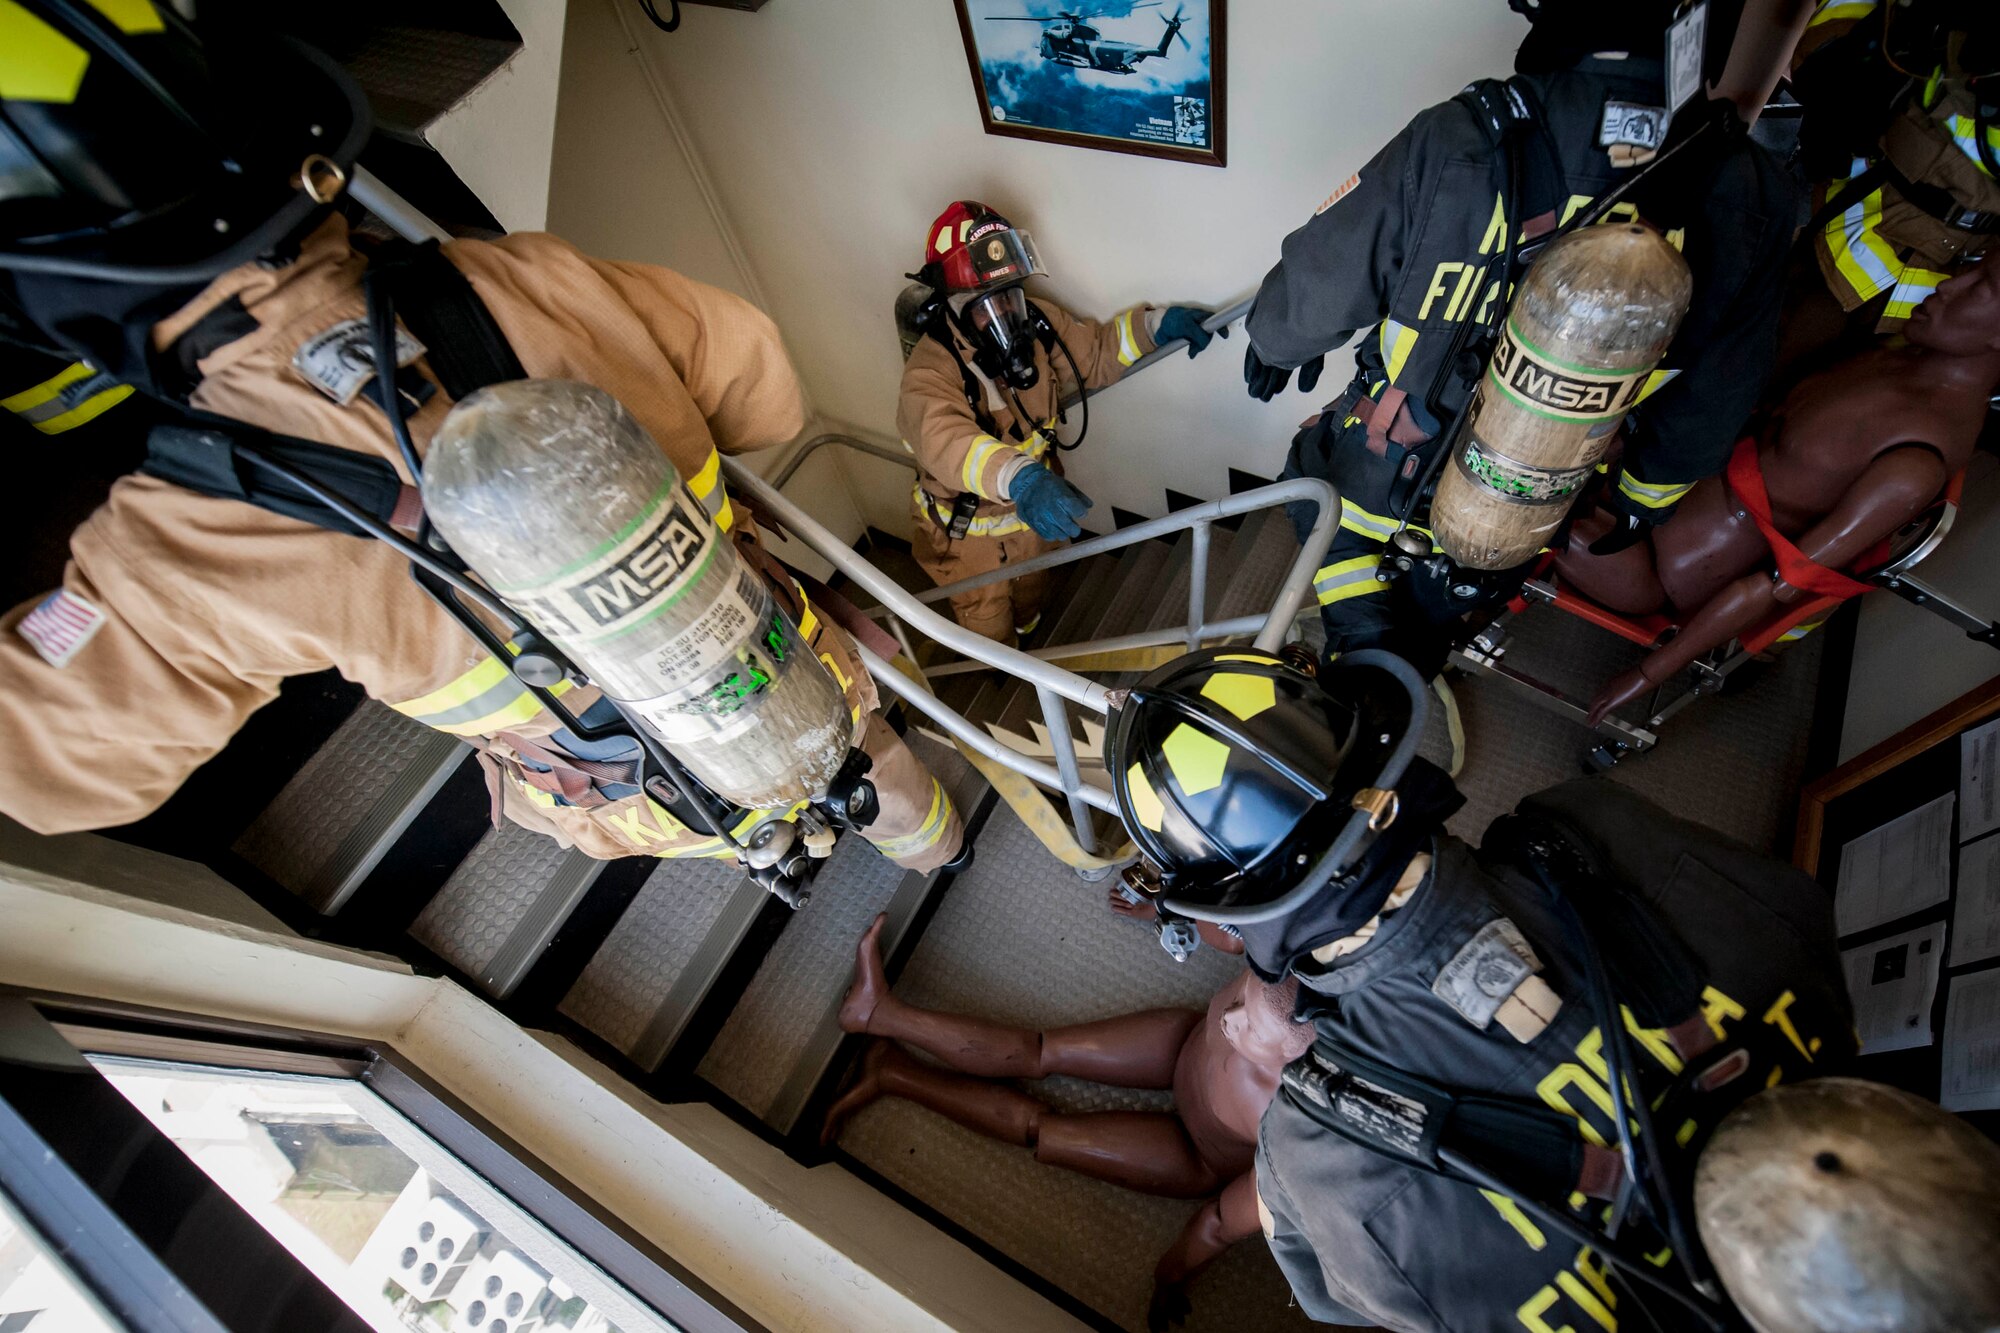 Firefighters of the 18th Civil Engineer Squadron perform a personnel recovery down a stairwell during a tower evacuation drill Aug. 15, 2016, at Kadena Air Base, Japan. The tower drill enabled firefighters to become familiar with the layout of the structure, involving cramped spaces offering little room for maneuvering personnel and equipment. (U.S. Air Force photo by Senior Airman Peter Reft)